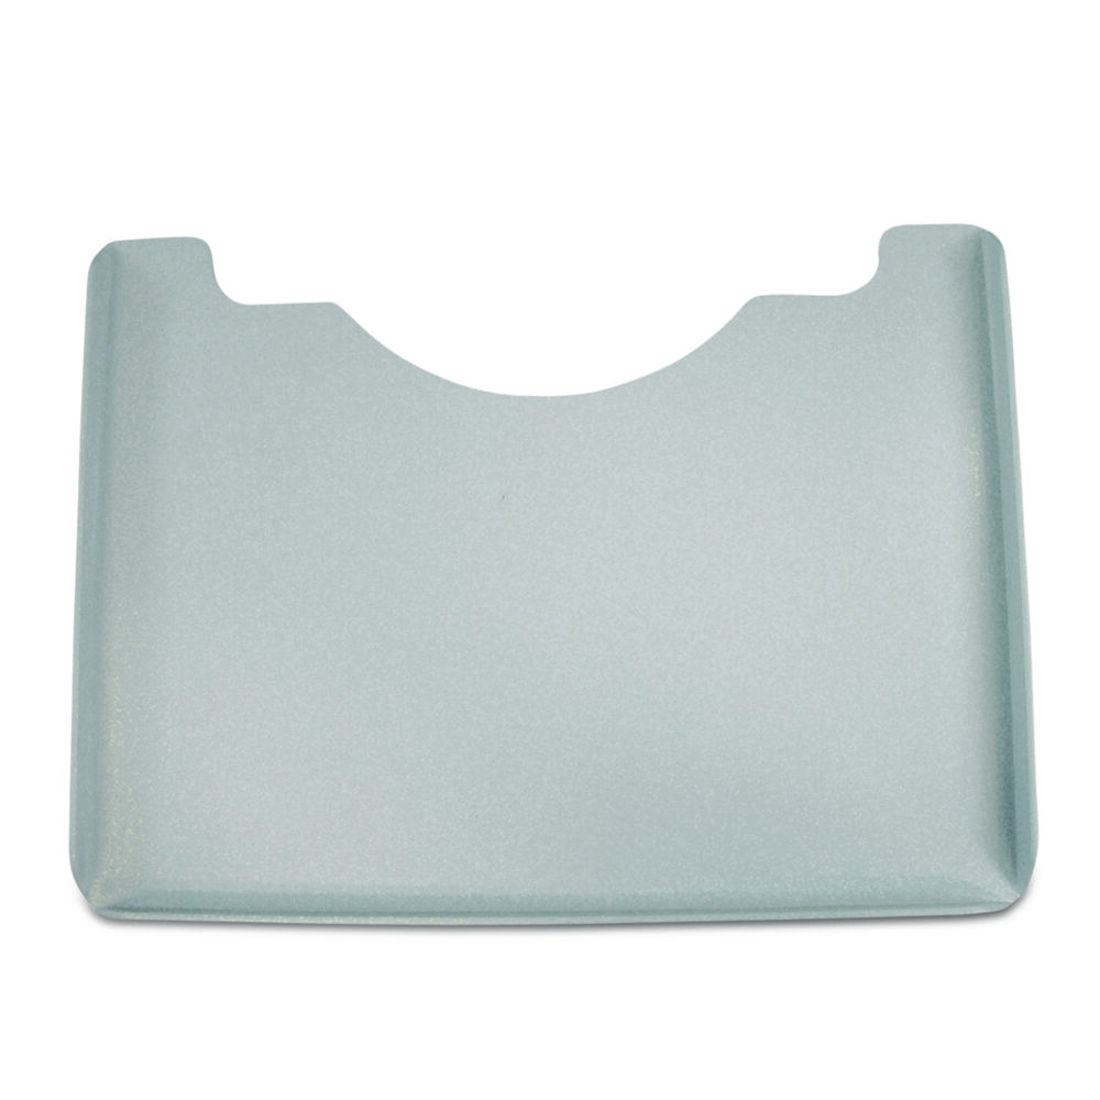 50444 Accessories trays Tray with edge shape 3.jpg